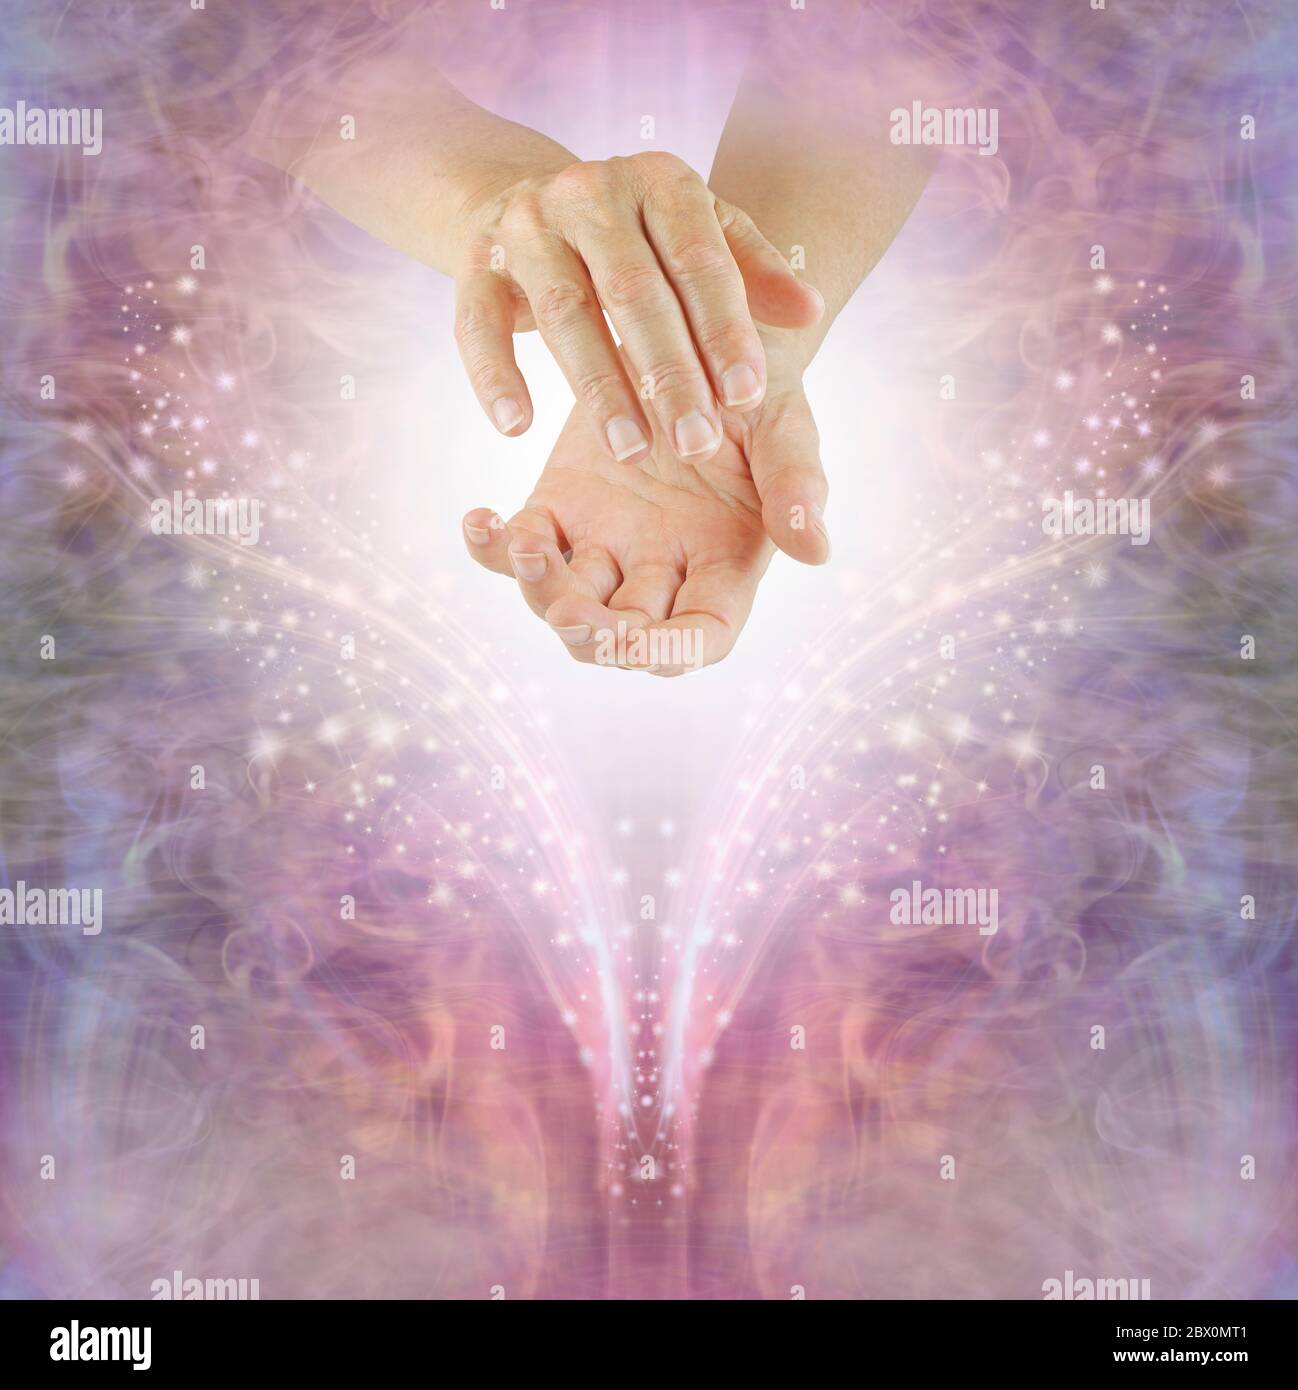 Sending out Reiki healing energy across the ether - female with cupped hands against a beautiful pink sparkling angelic background with copy space Stock Photo